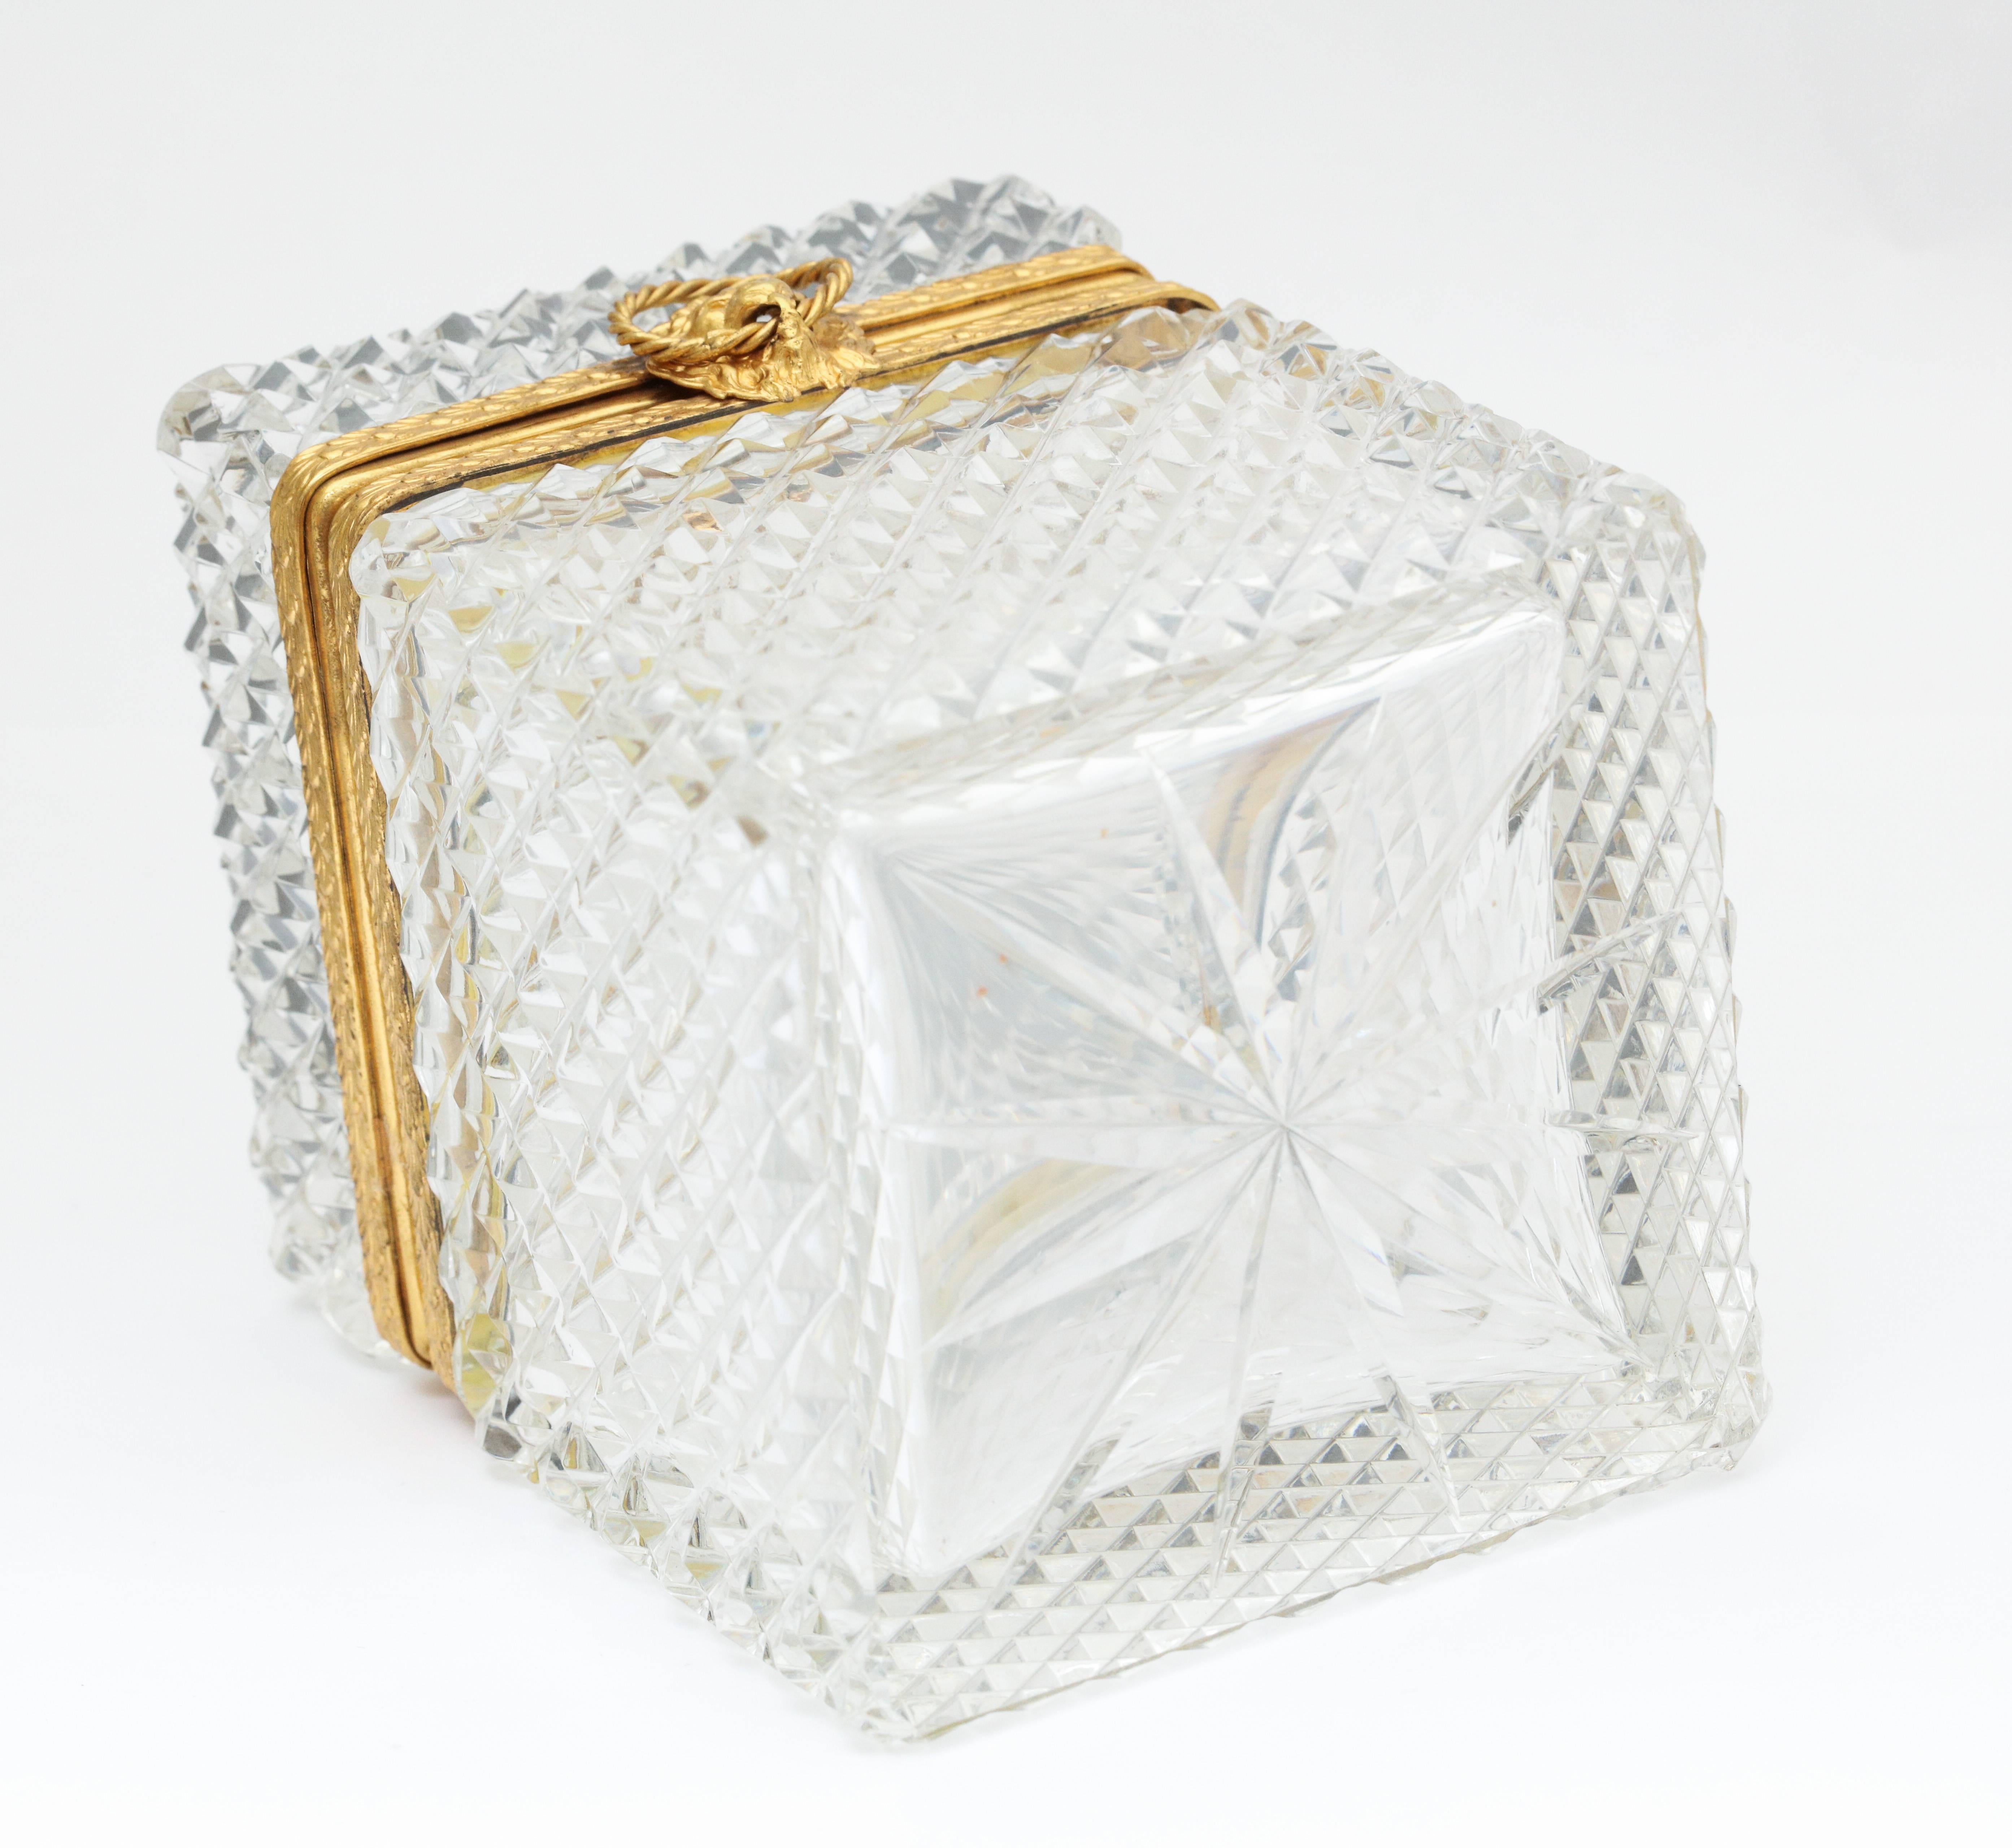 A wonderful crystal box with brass lion head clasp and trim.